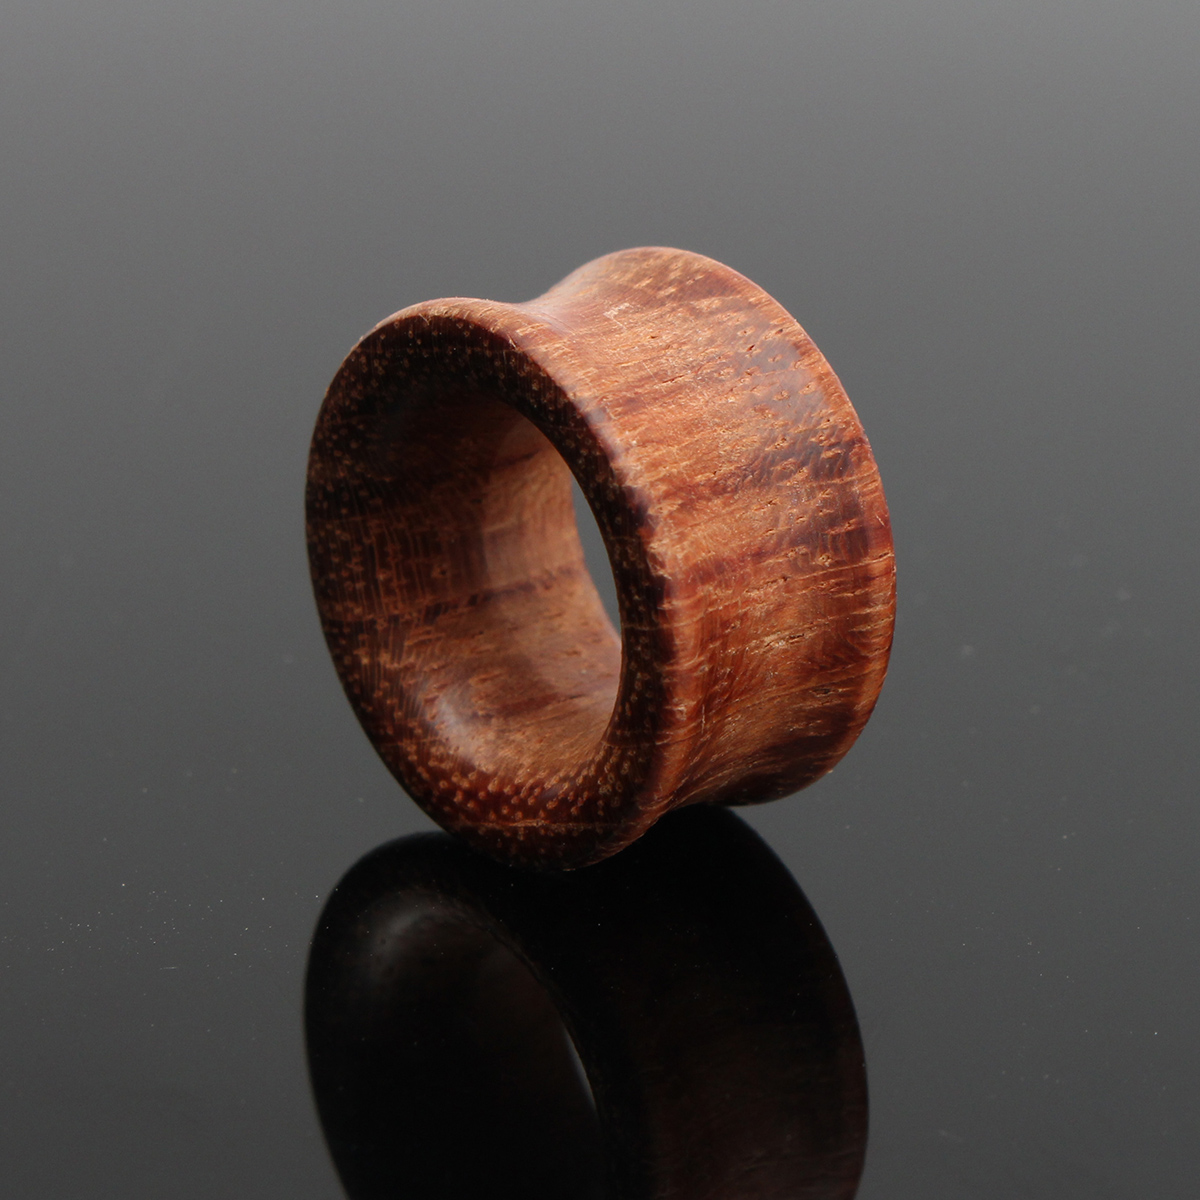 8mm-20mm-1pc-Wooden-Tunnels-Ear-Gauges-Plugs-Hollow-Expander-1061323